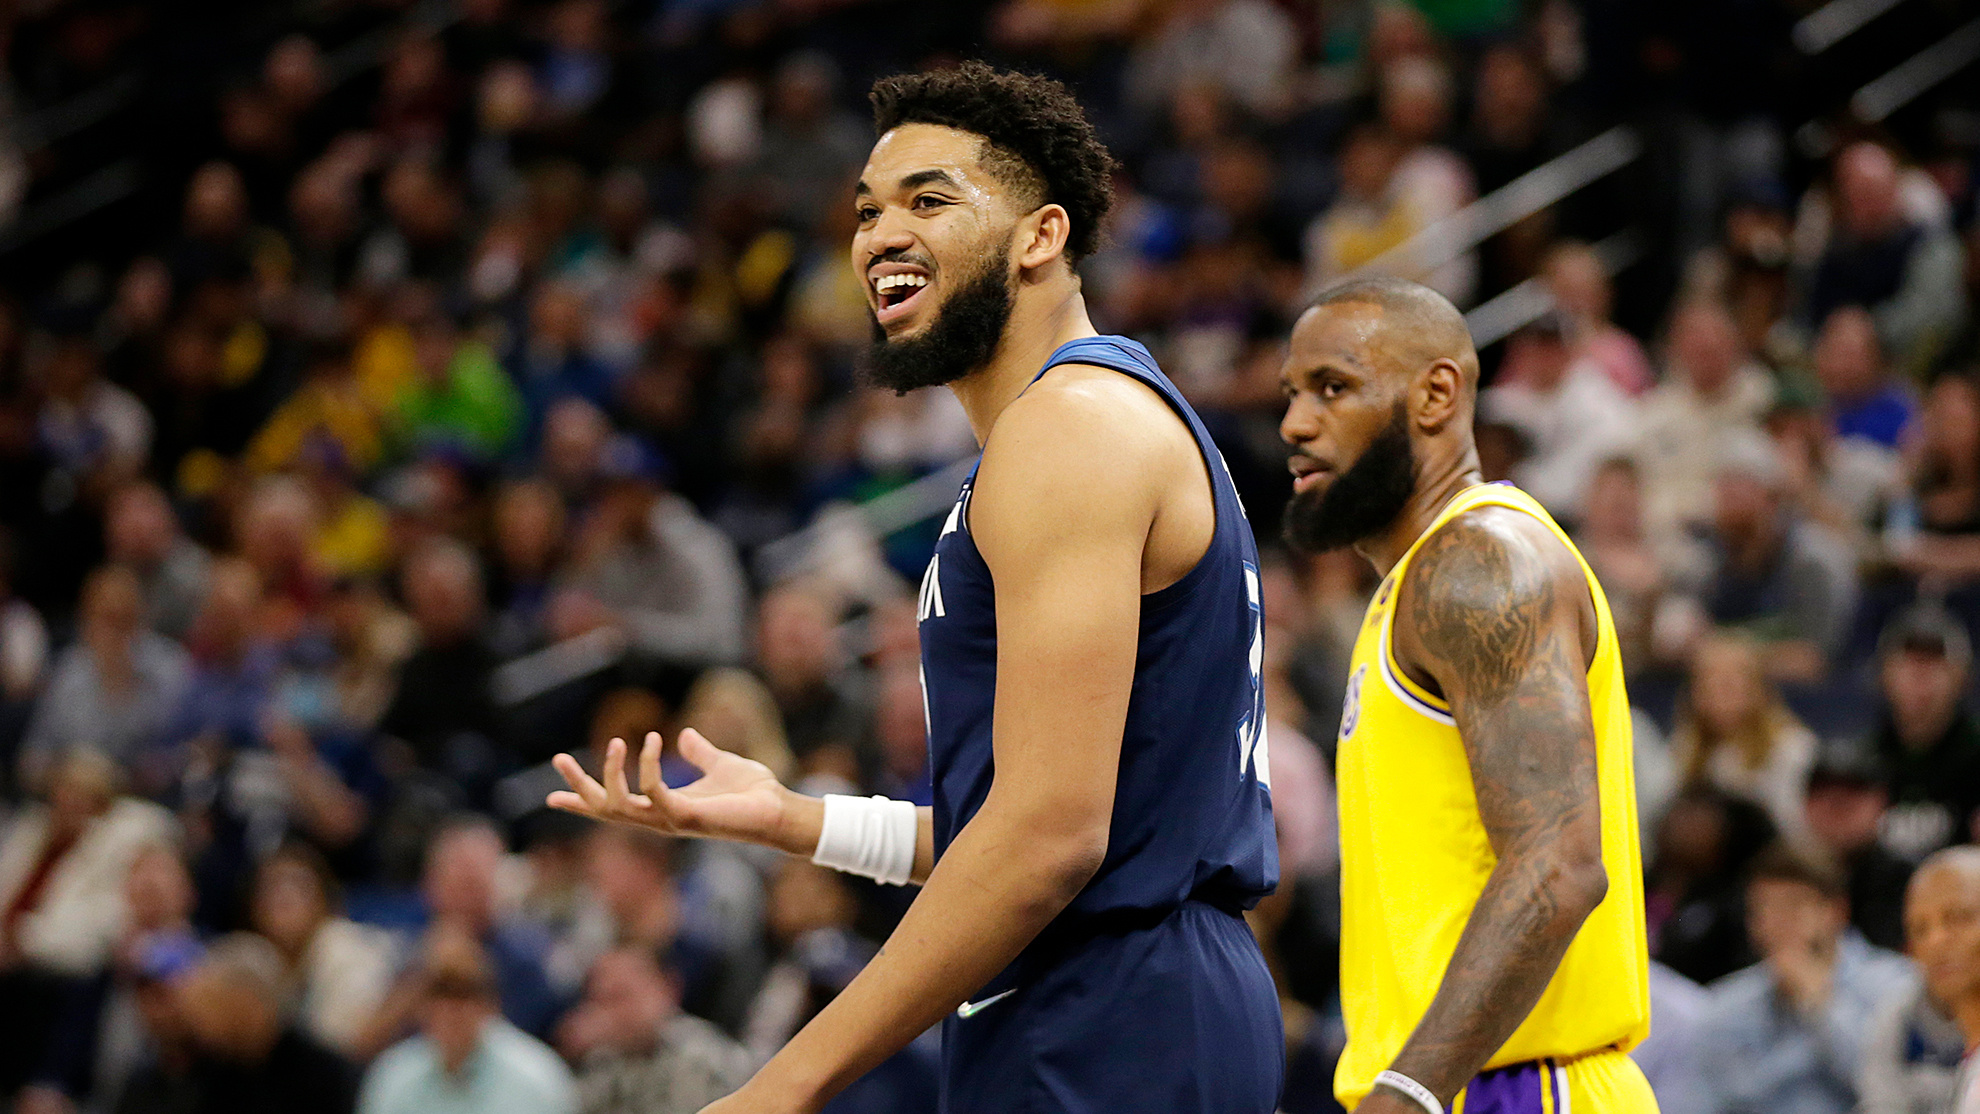 Karl-Anthony Towns, Trash-talking, Lakers rivalry, Controversial remarks, 1980x1120 HD Desktop